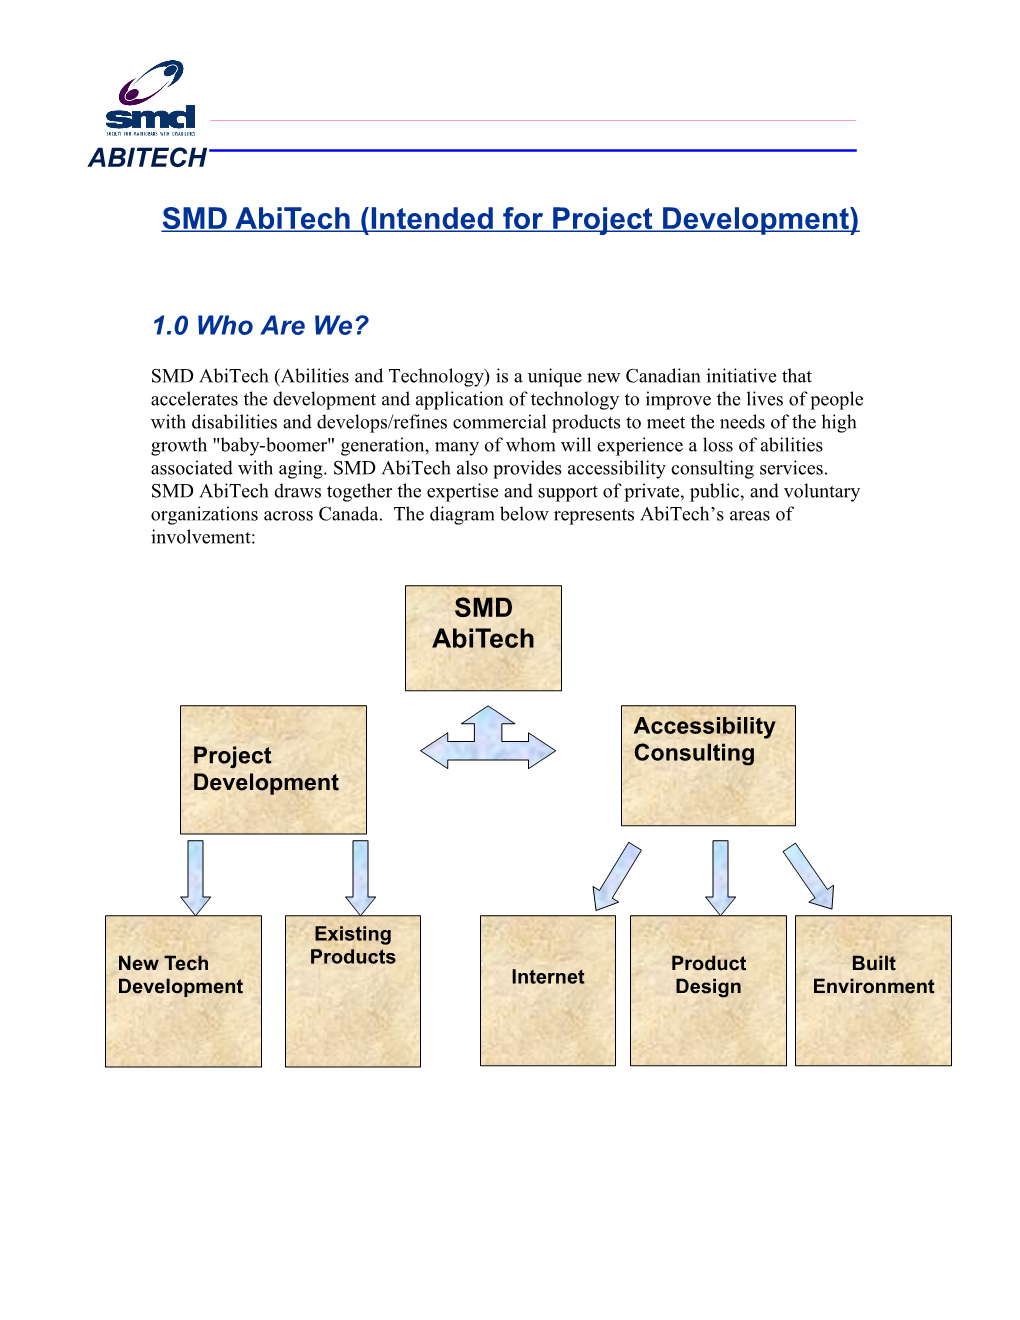 SMD Abitech (Intended for Project Development)